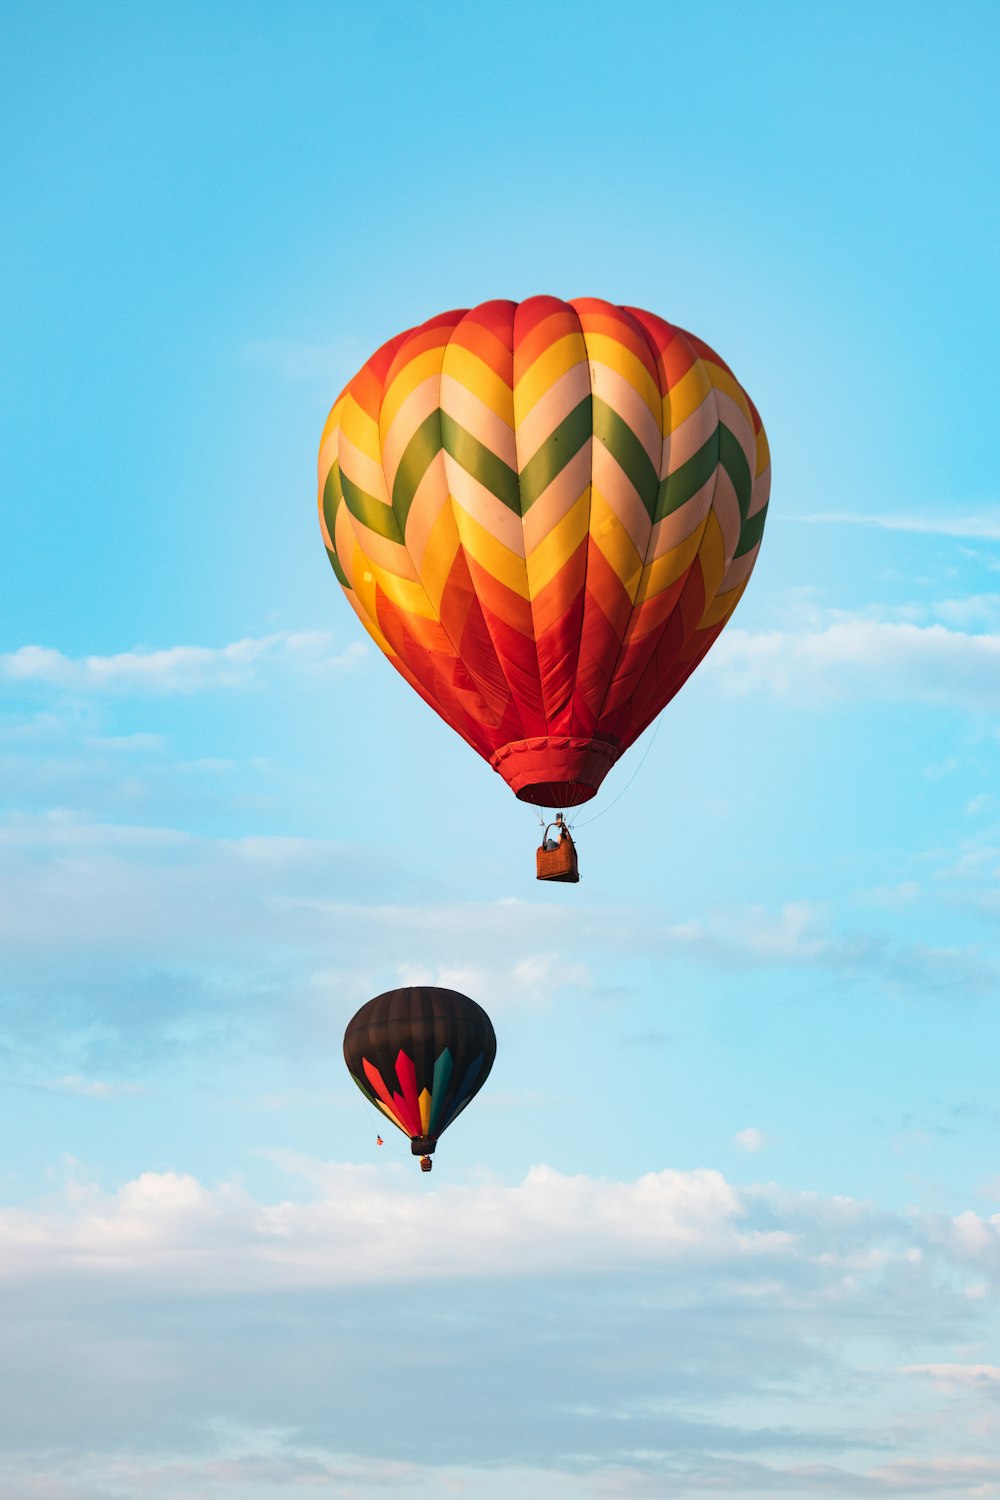 green yellow and red hot air balloon in mid air under blue sky during daytime